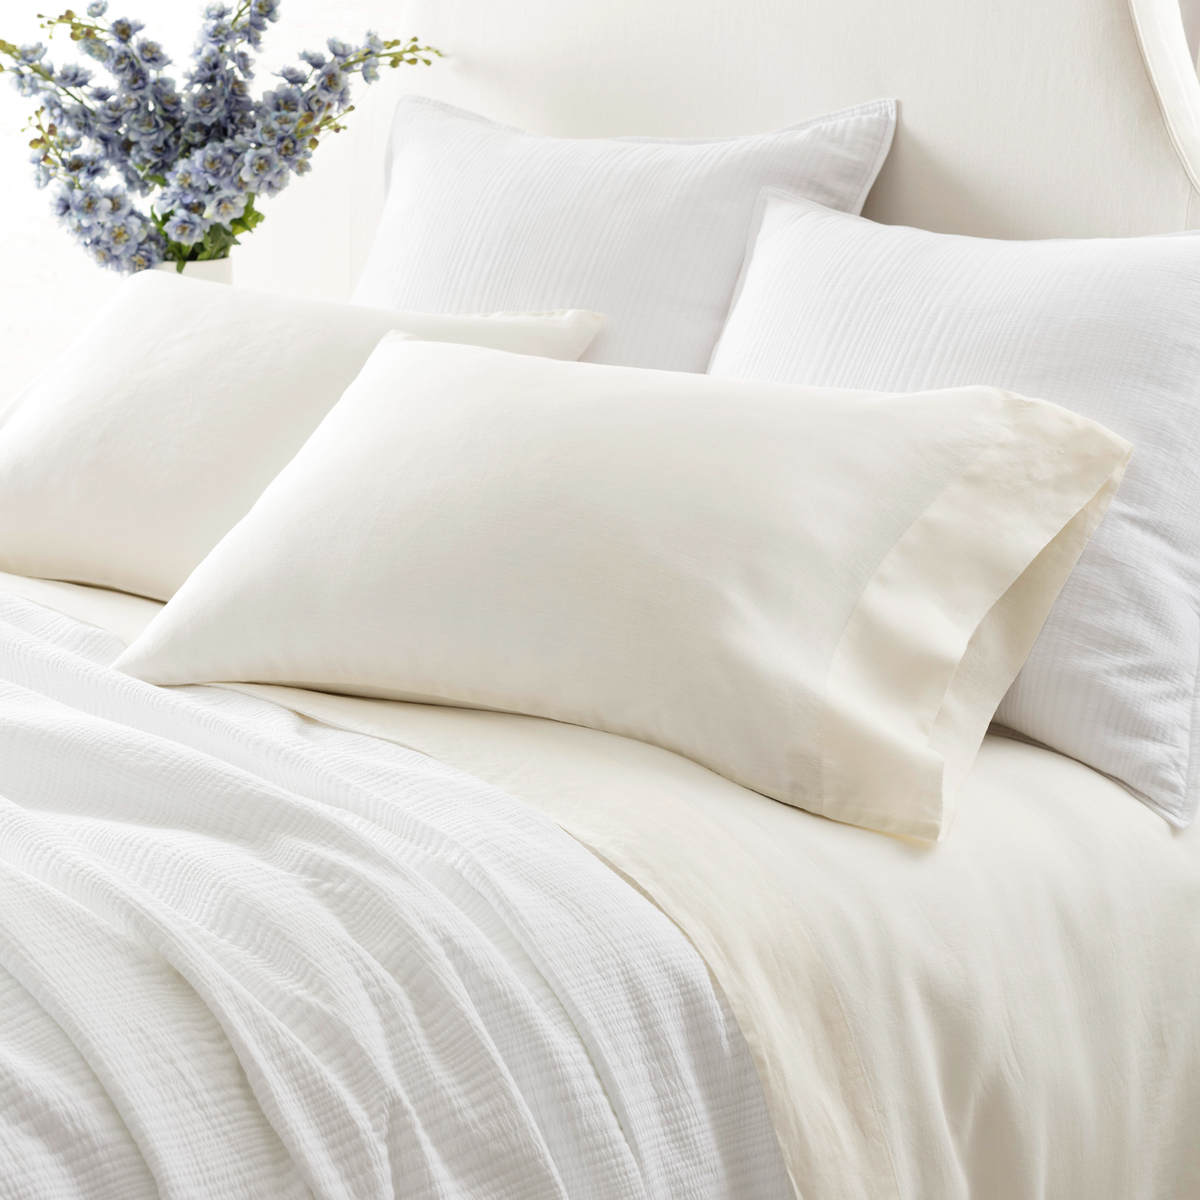 Ivory Pillowcases of Pine Cone Hill Lush Linen Bedding